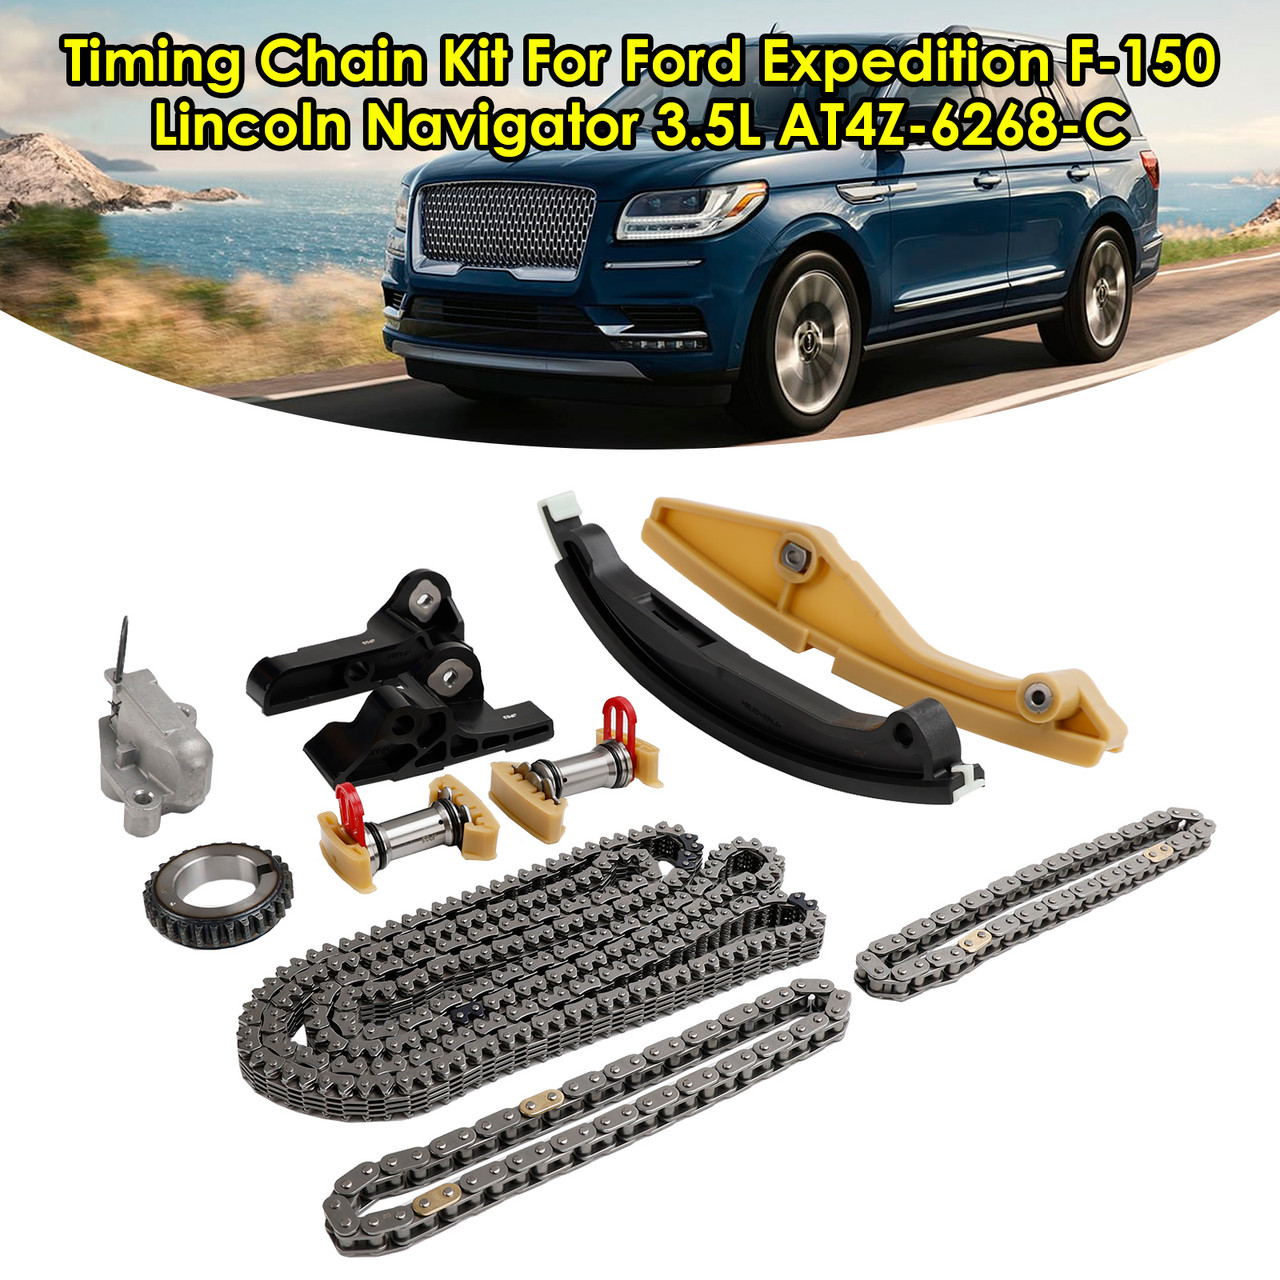 Timing Chain Kit For Ford Expedition F-150 Lincoln Navigator 3.5L AT4Z-6268-C